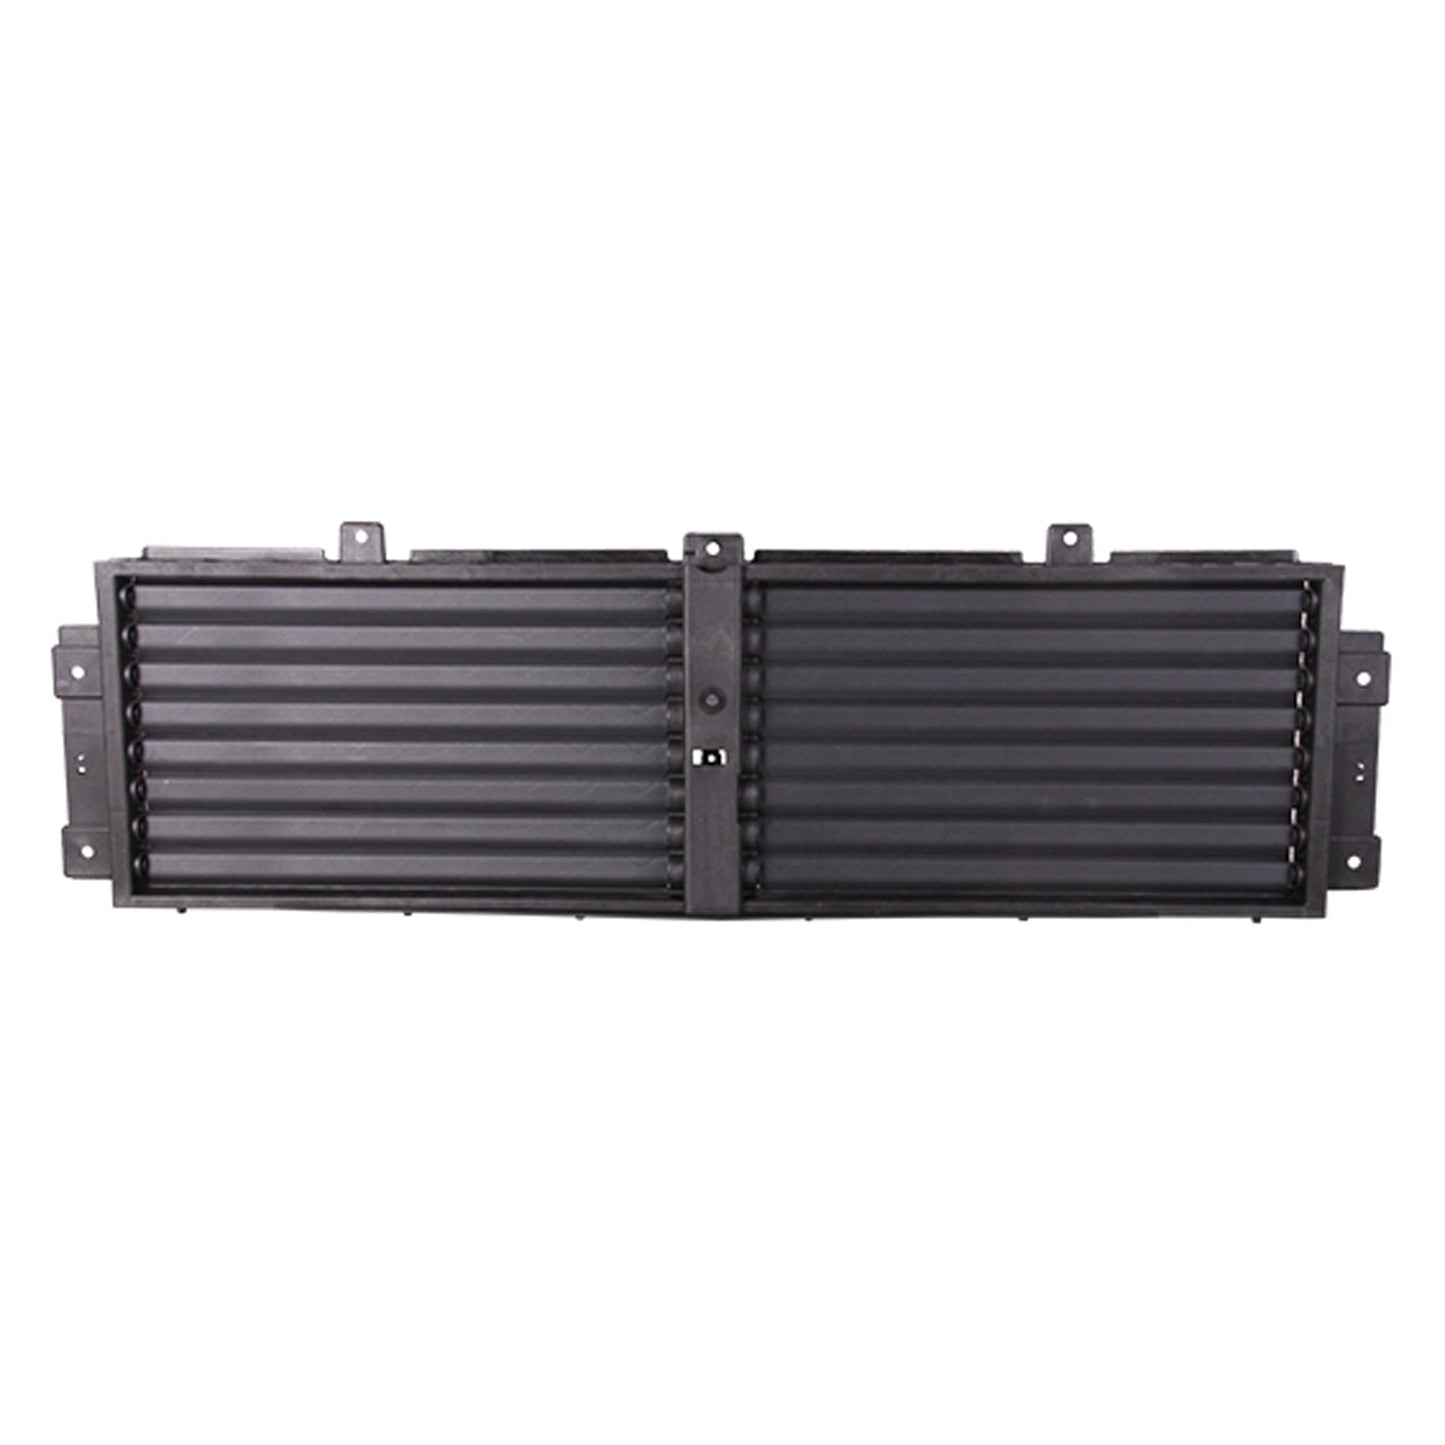 1206 | 2018-2020 CHEVROLET TRAVERSE Grille air intake assy Active Grille Shutter | GM1206105|84646340